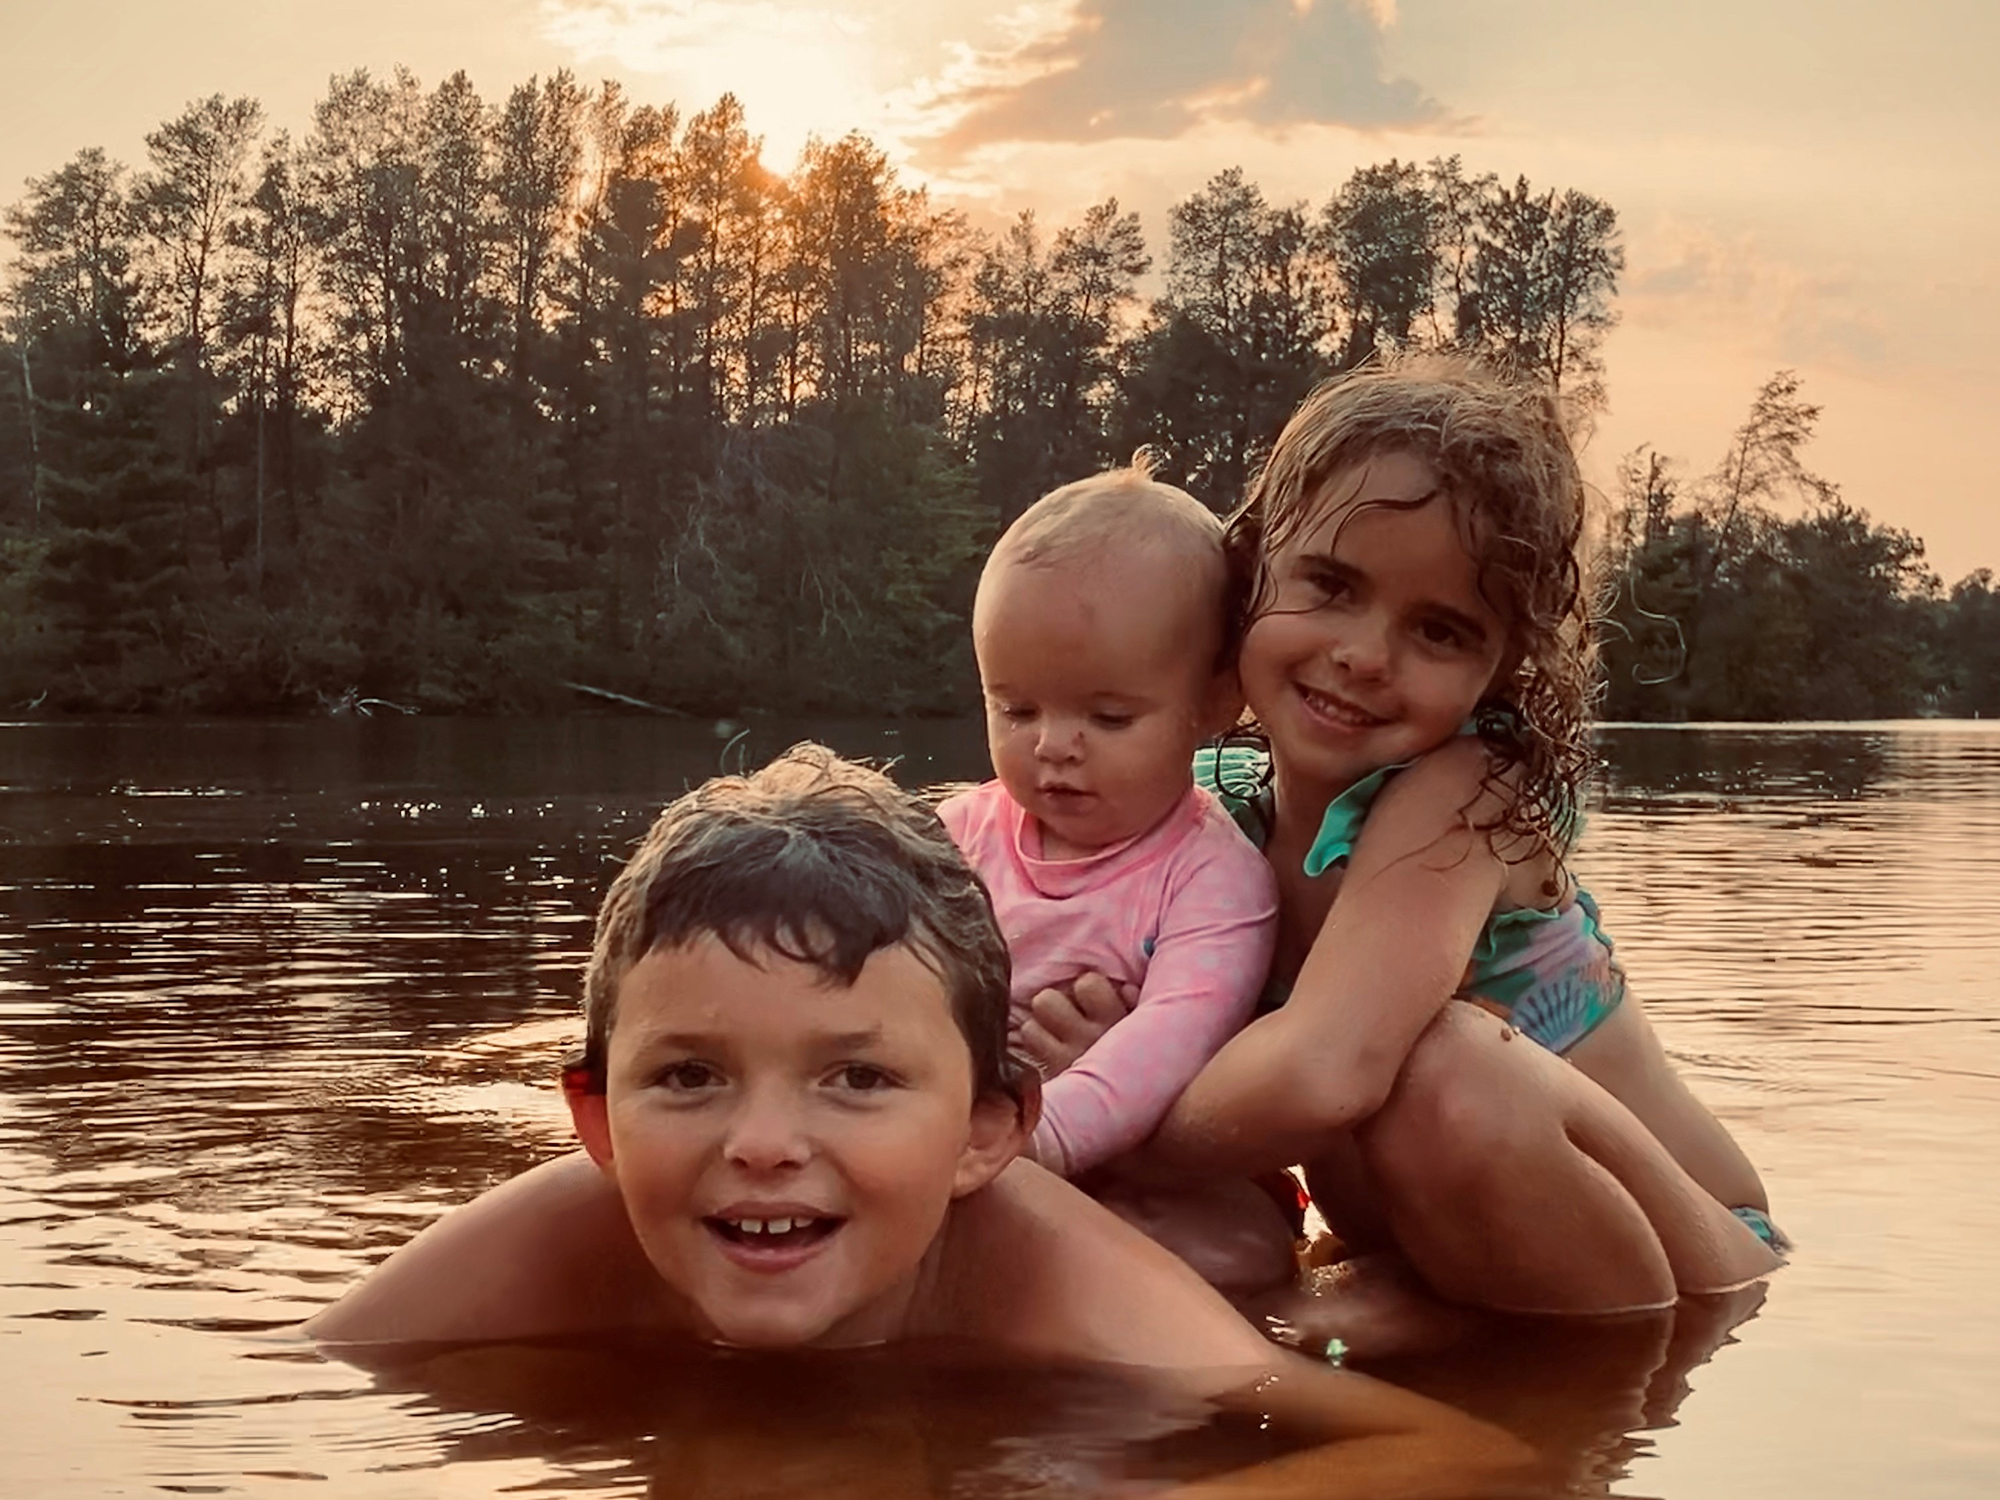 The Hollars children play in Coon Fork Lake in Augusta, Wisconsin. (Photo by BJ Hollars)